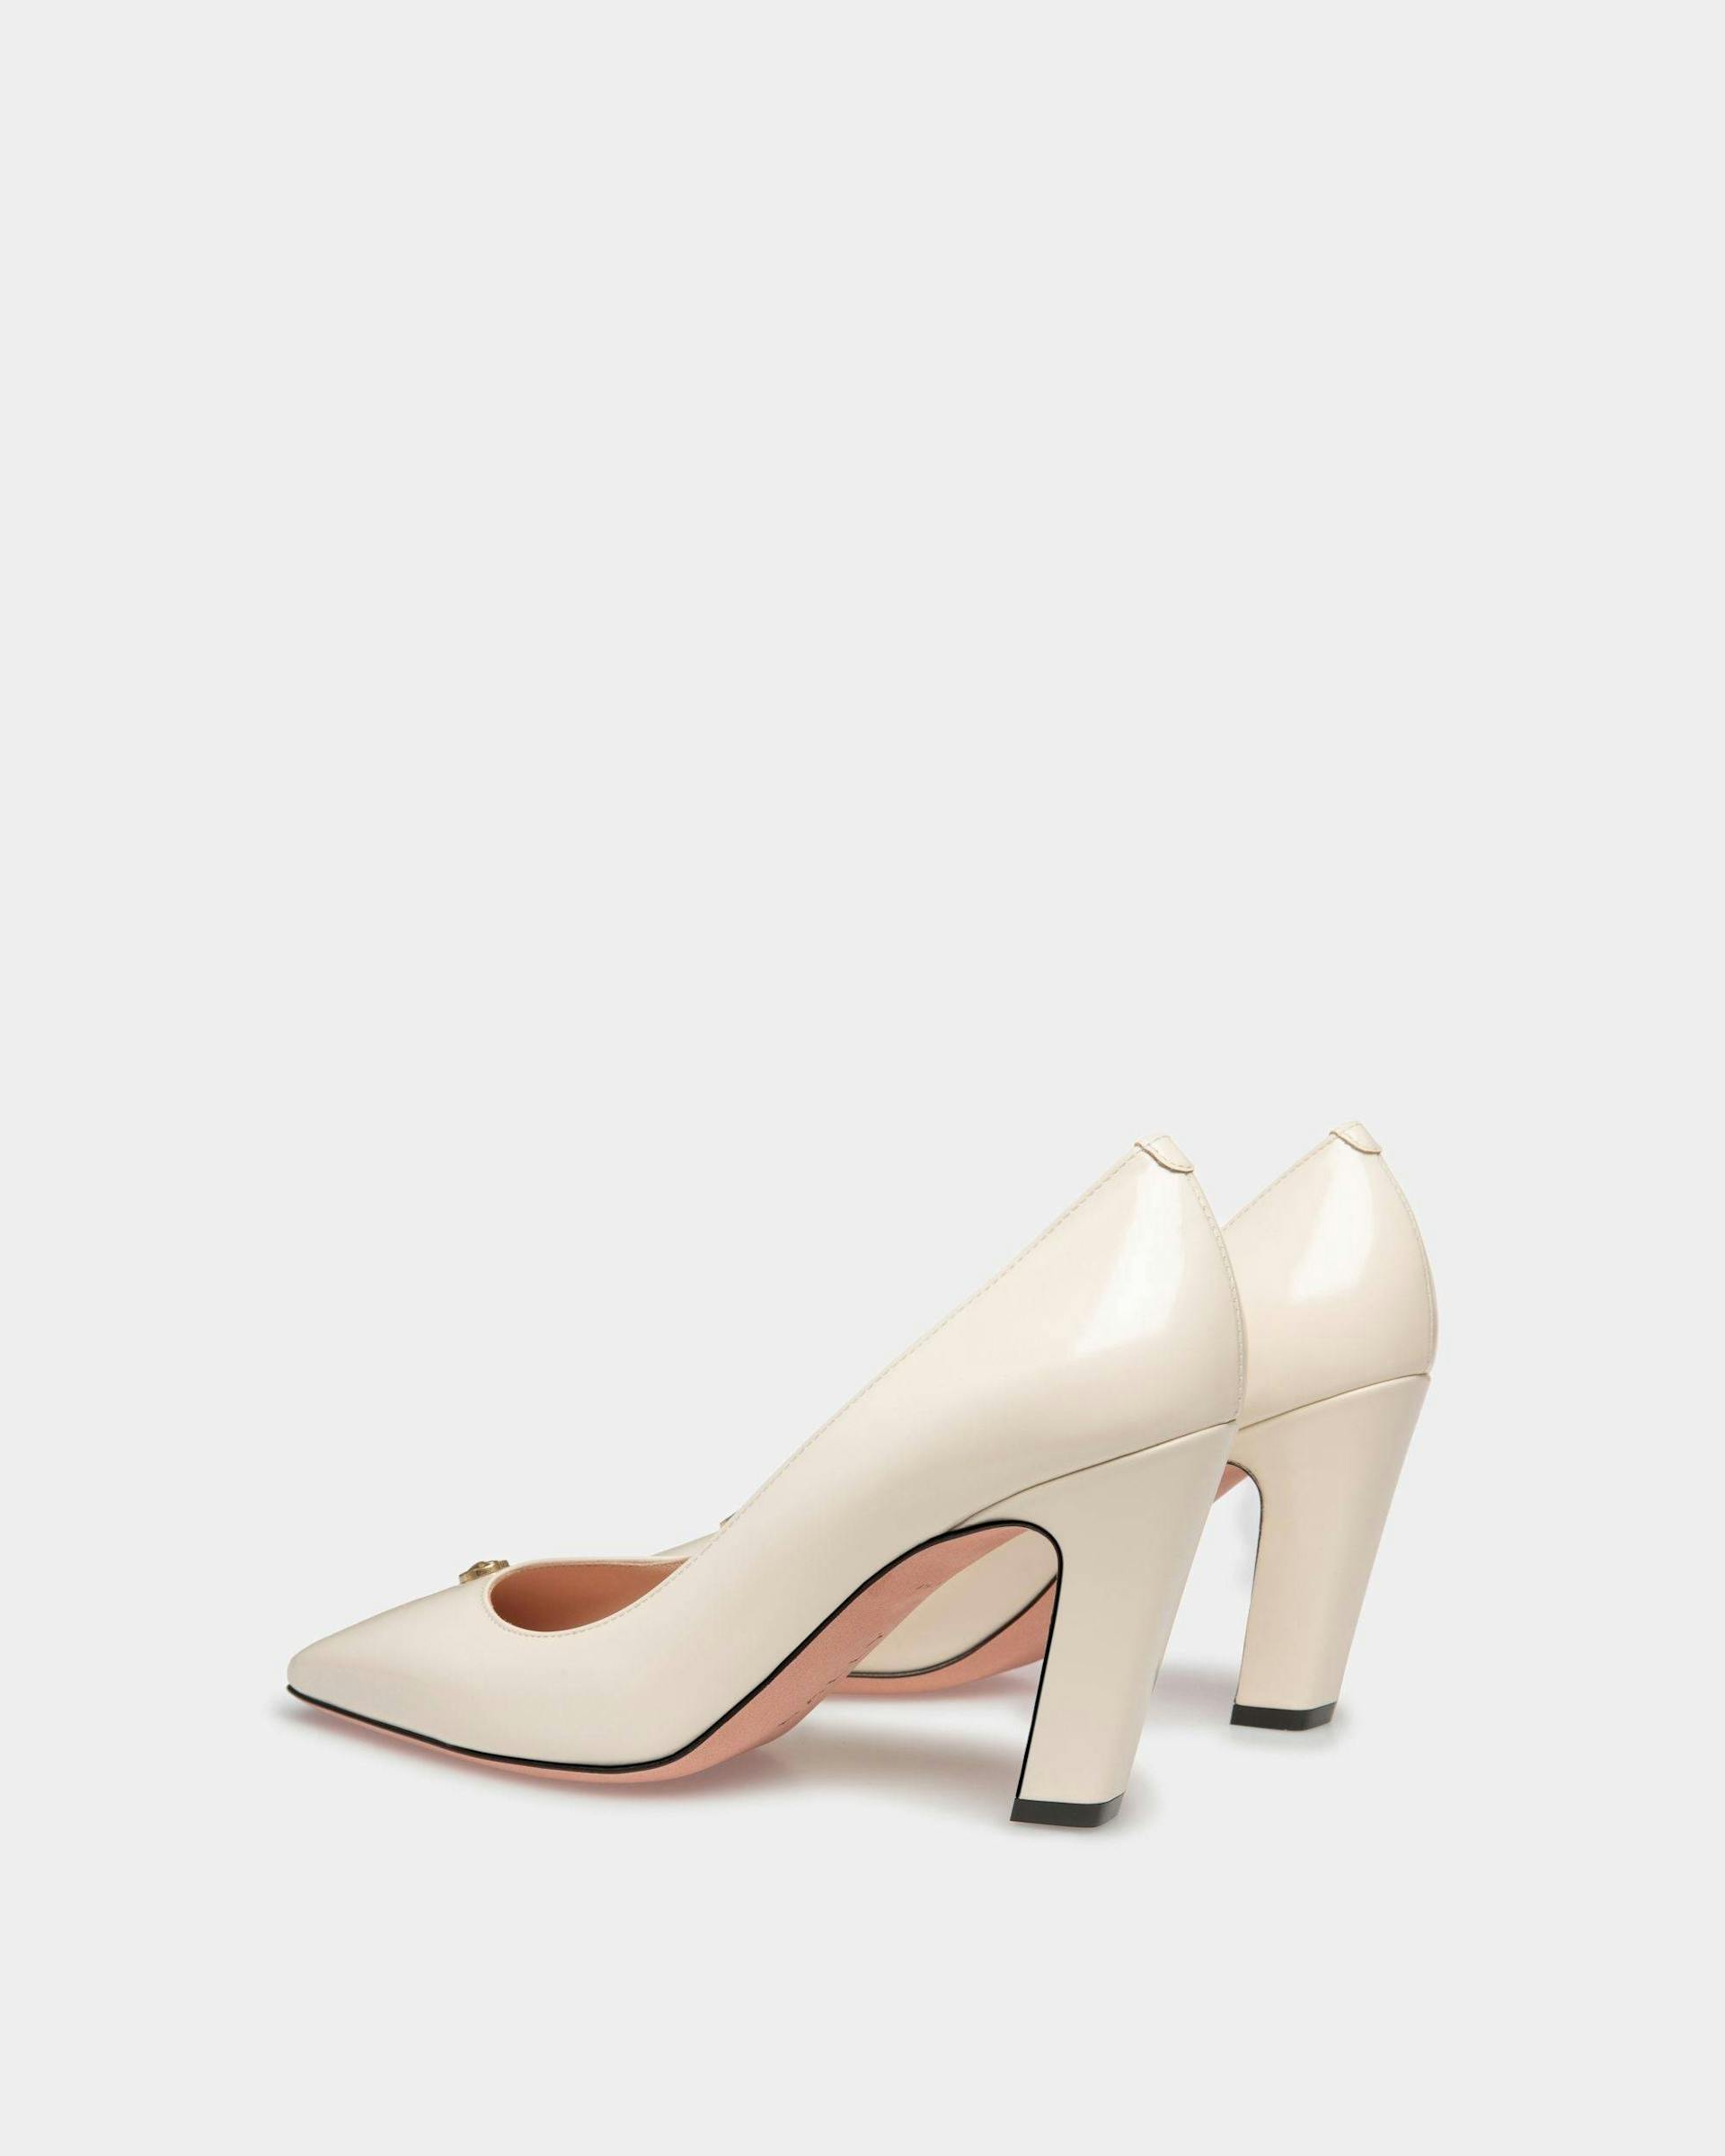 Women's Sylt Pump In White Leather | Bally | Still Life 3/4 Back